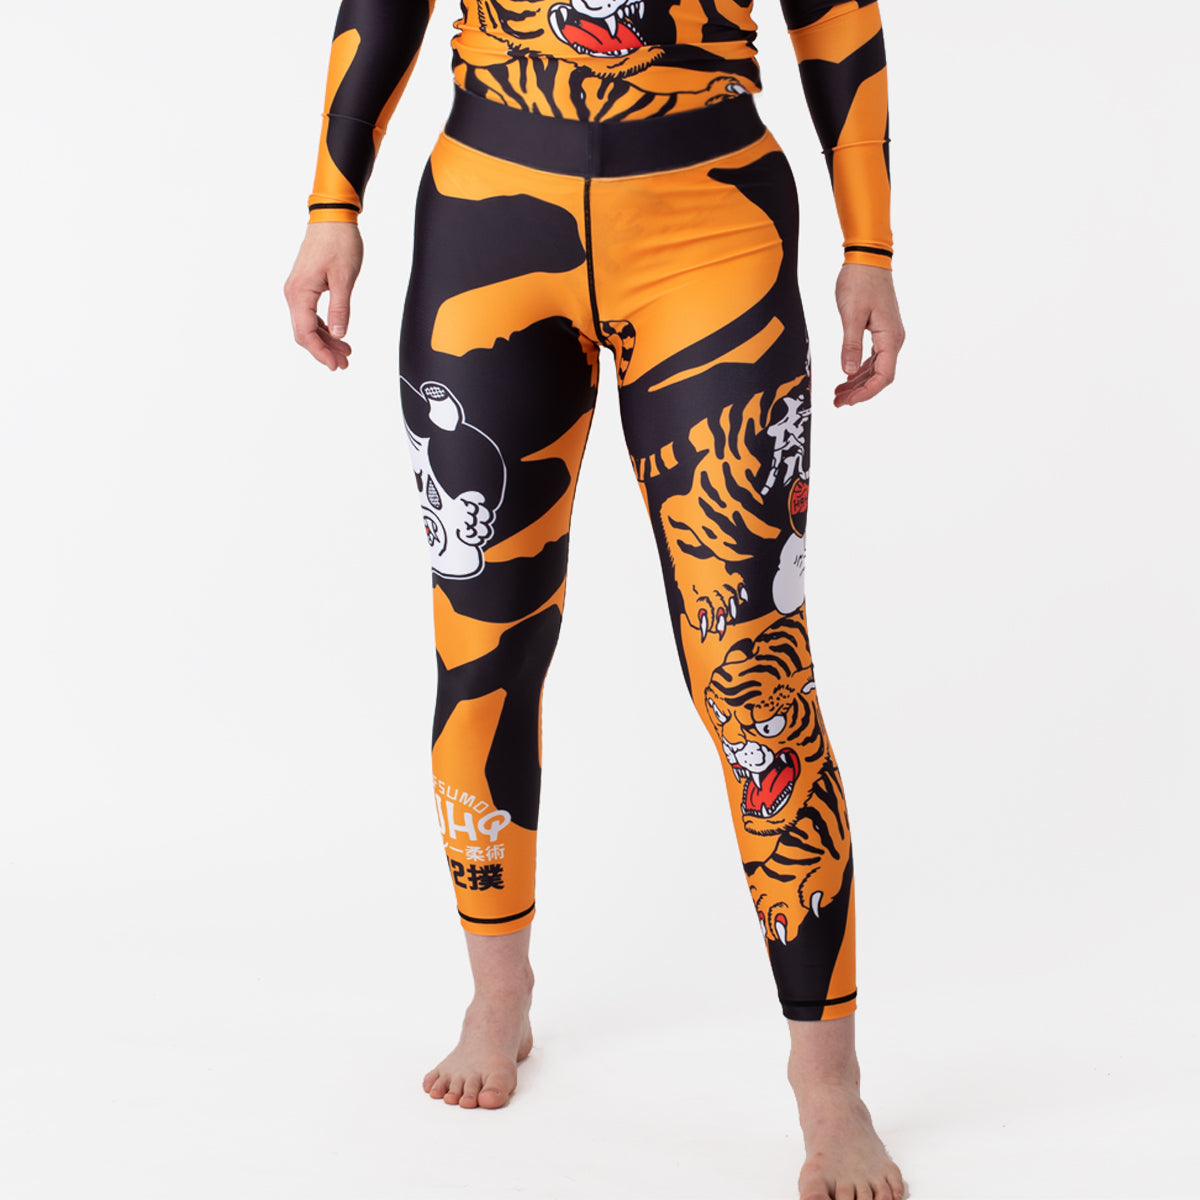 Half Sumo X HQ "Year of the Tiger" Women's Spats